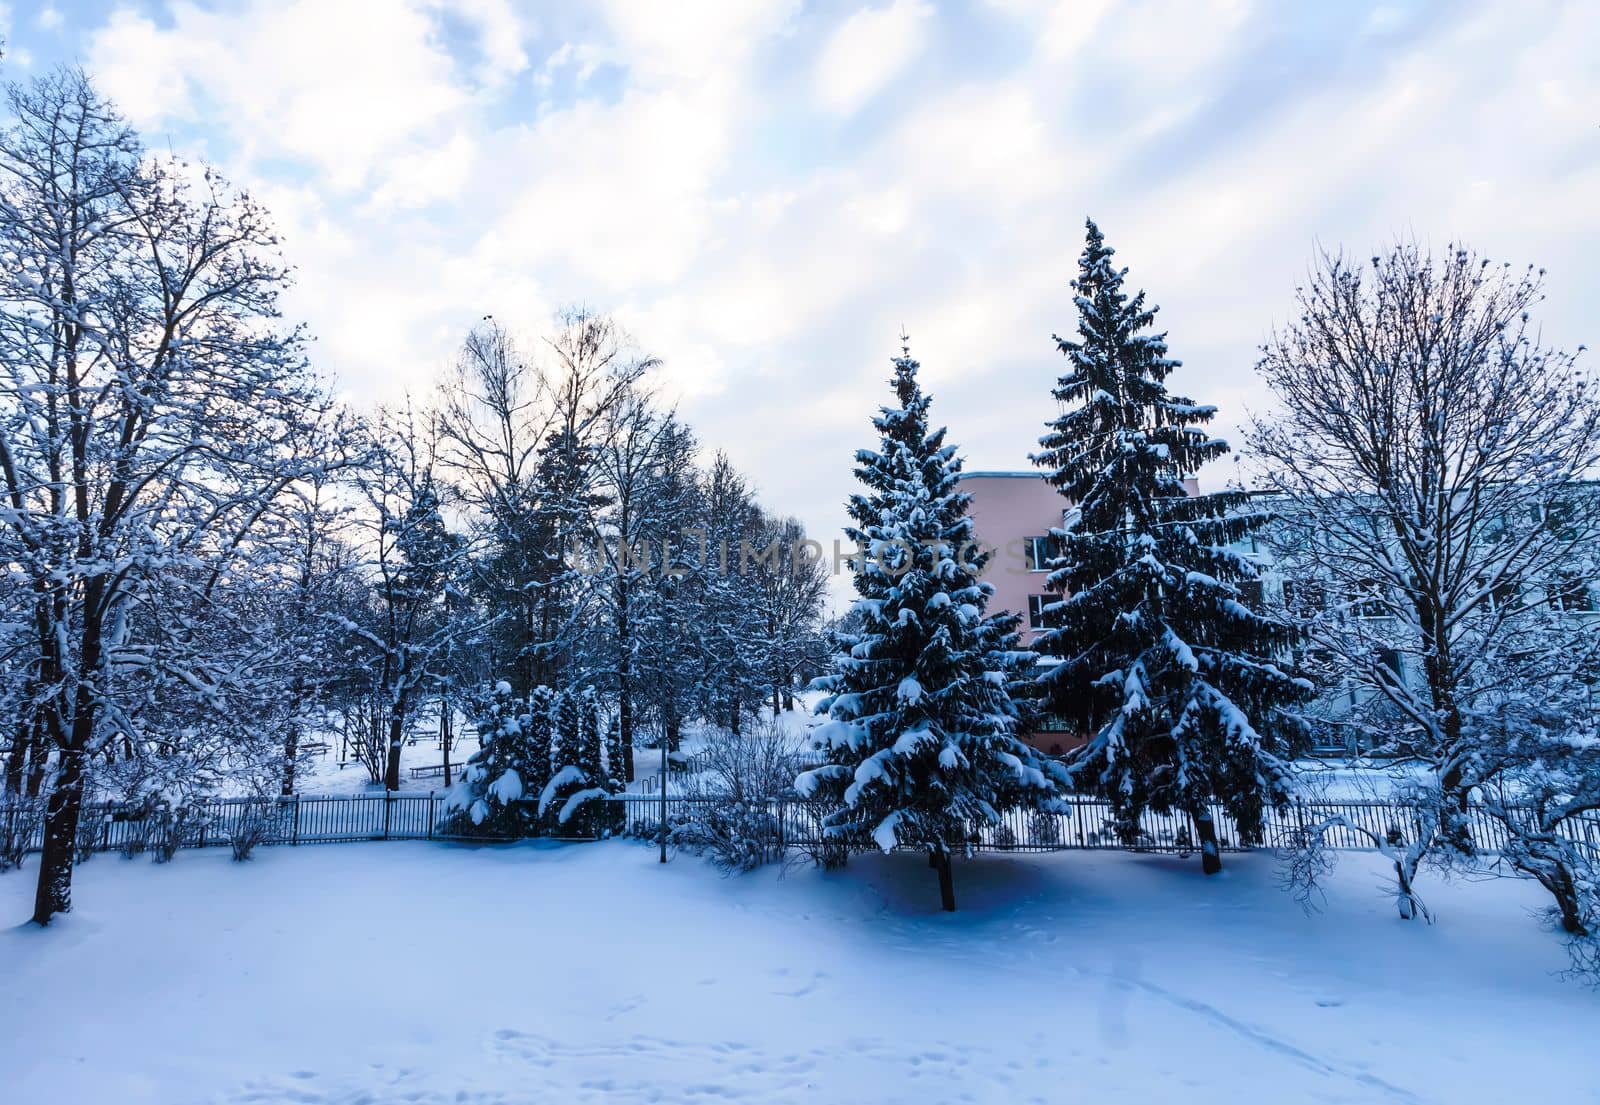 Winter urban landscape with snow-covered trees.